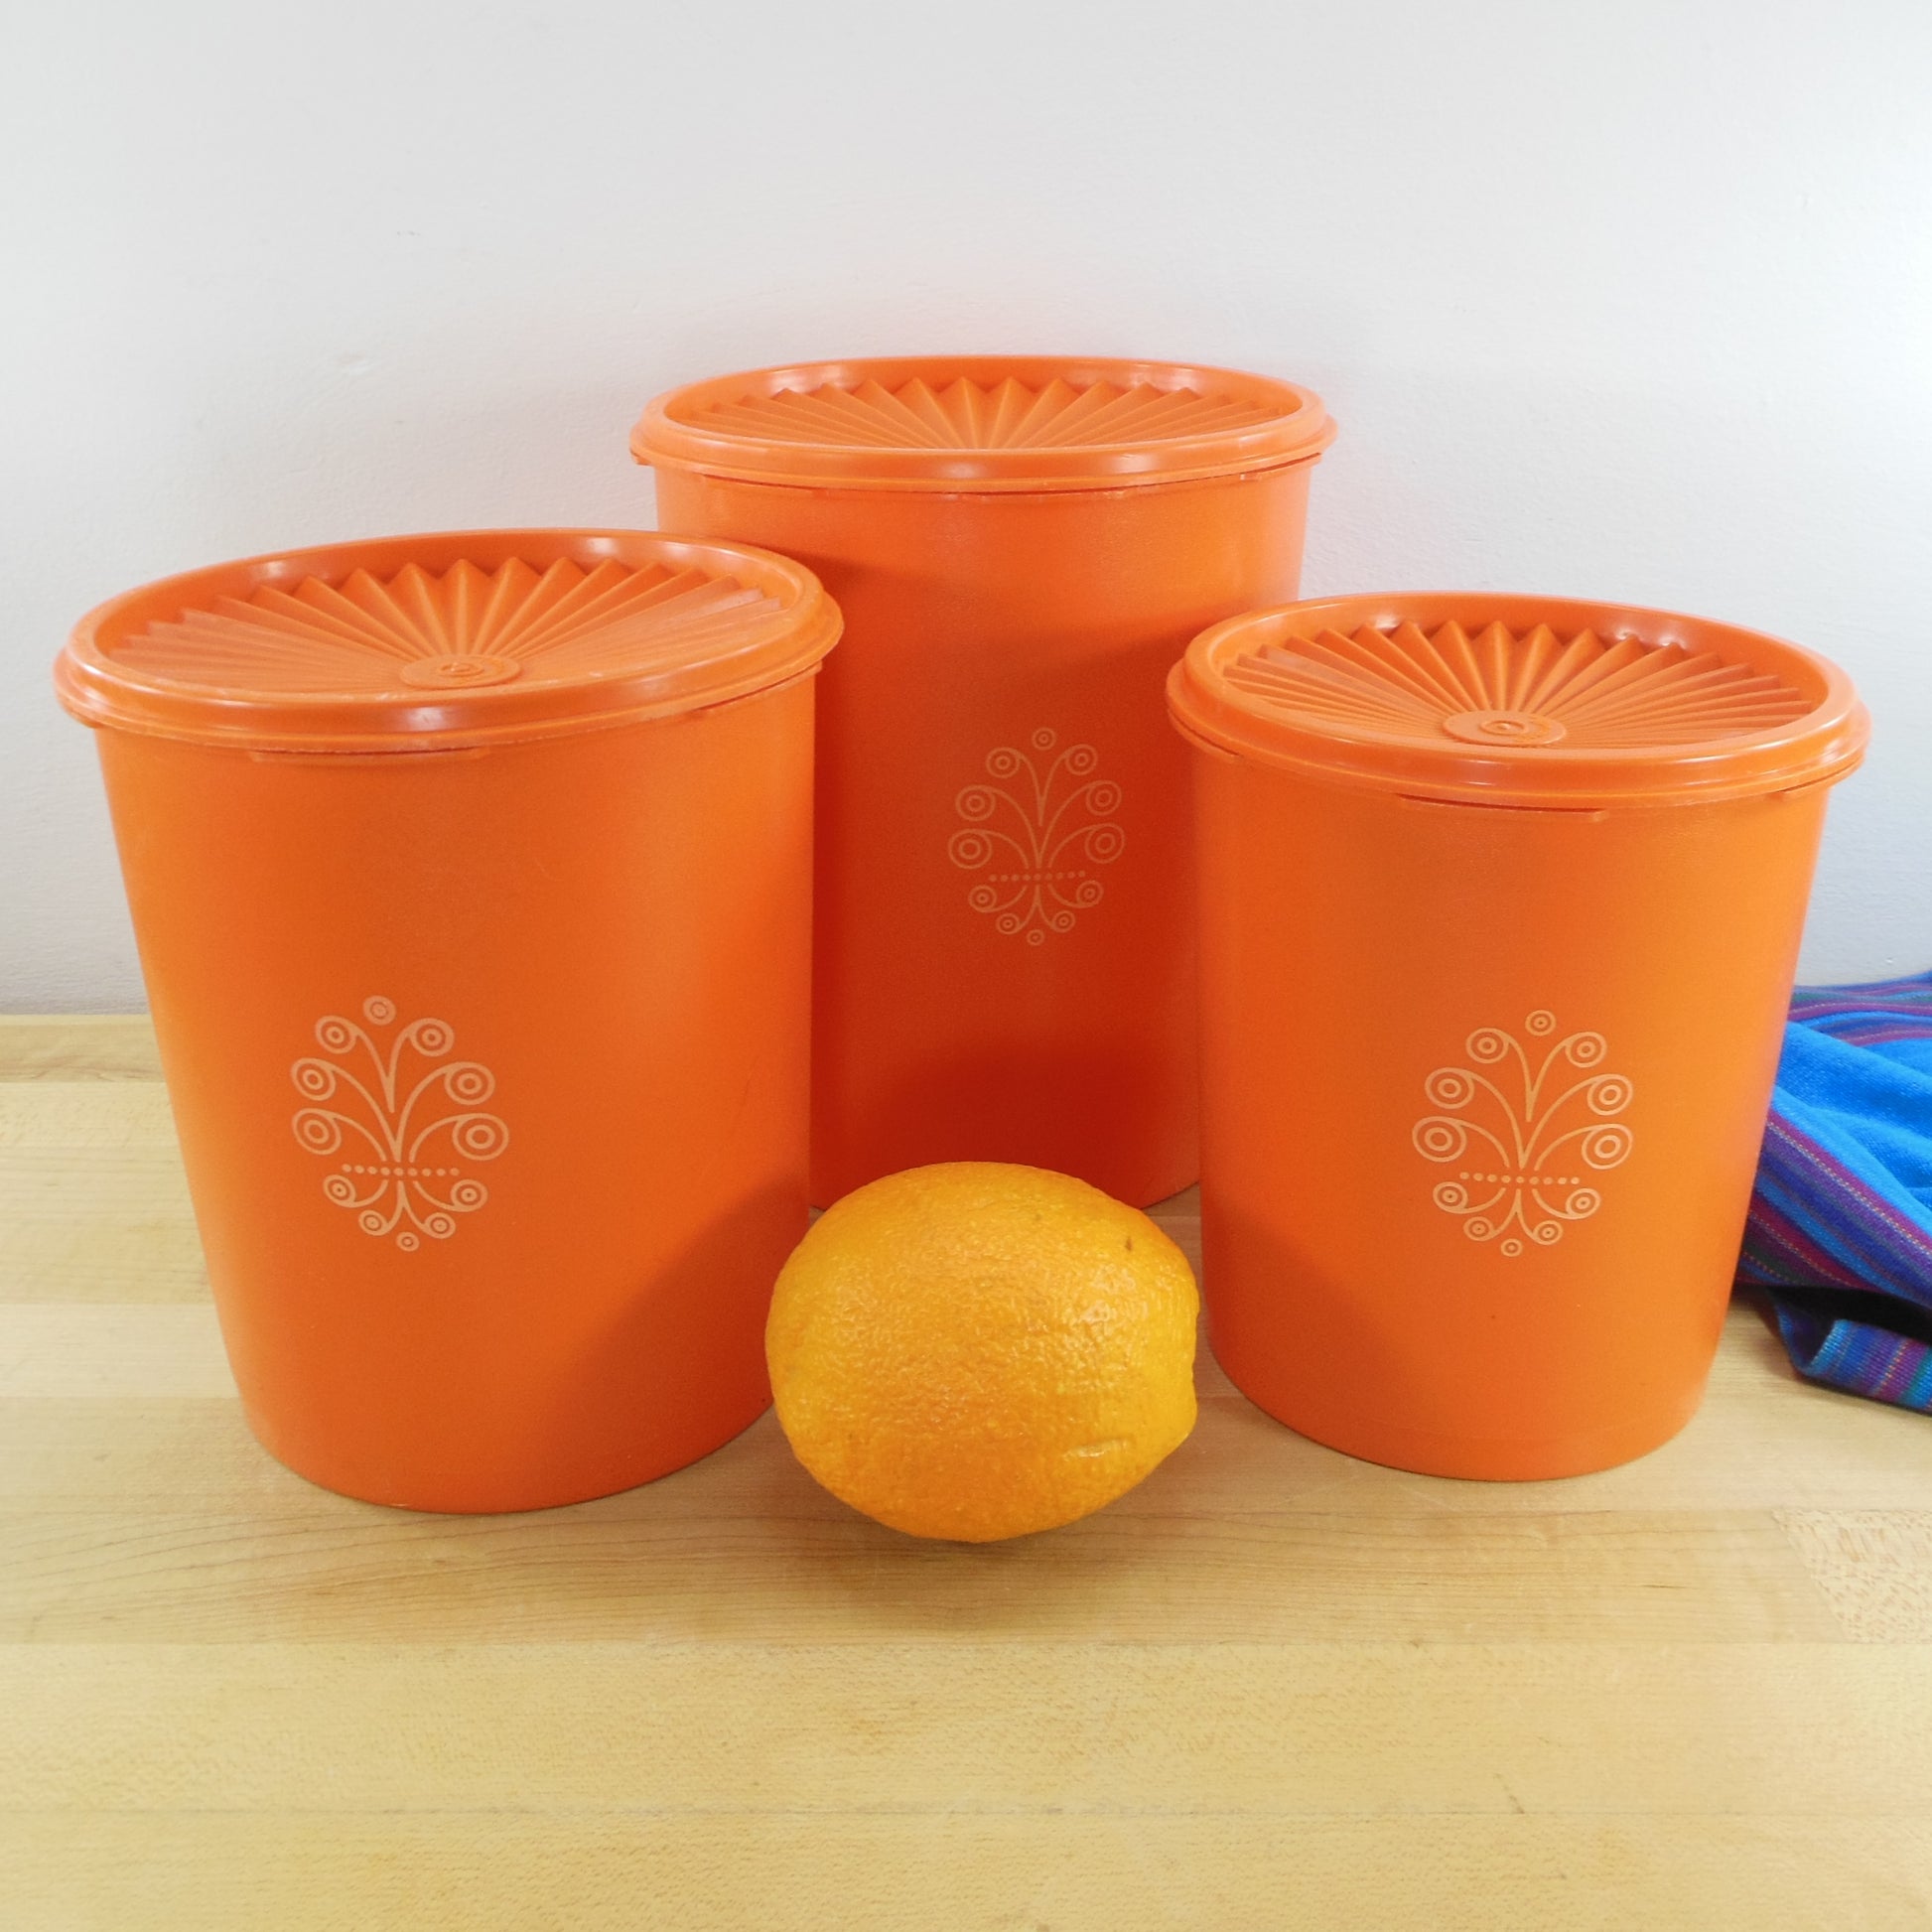 Vintage Tupperware Canister set - household items - by owner - housewares  sale - craigslist